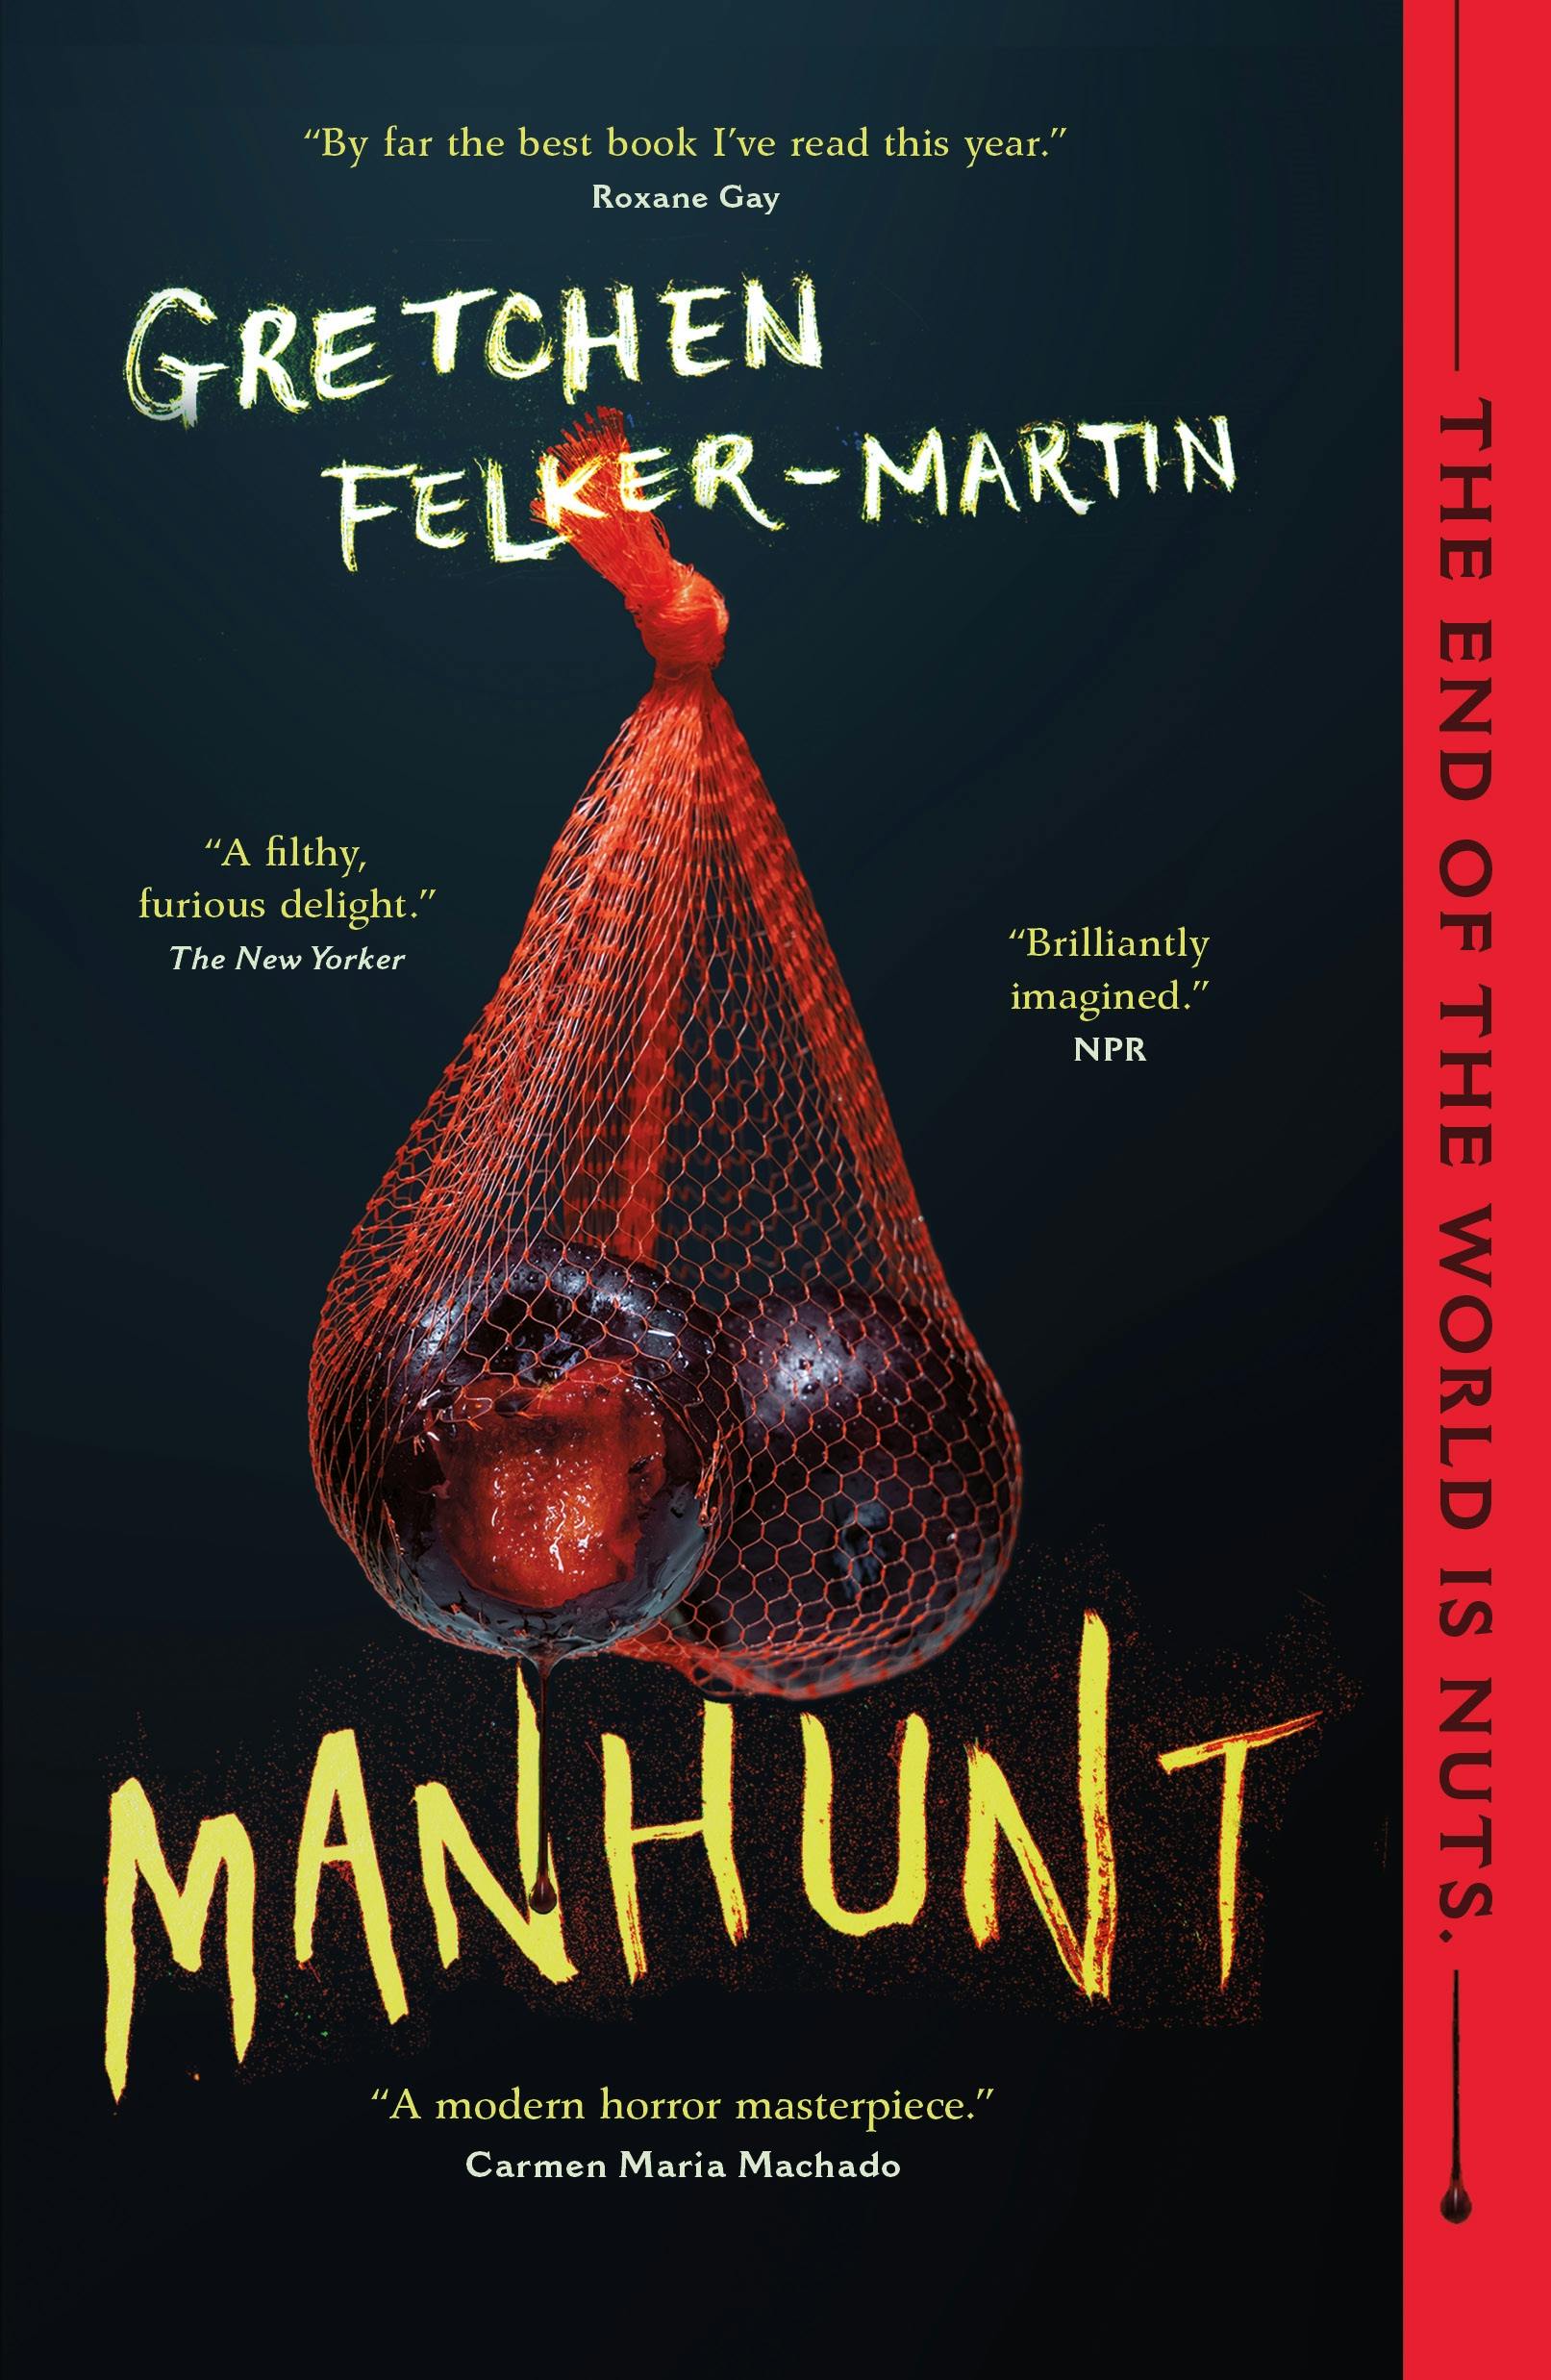 Cover for the book titled as: Manhunt